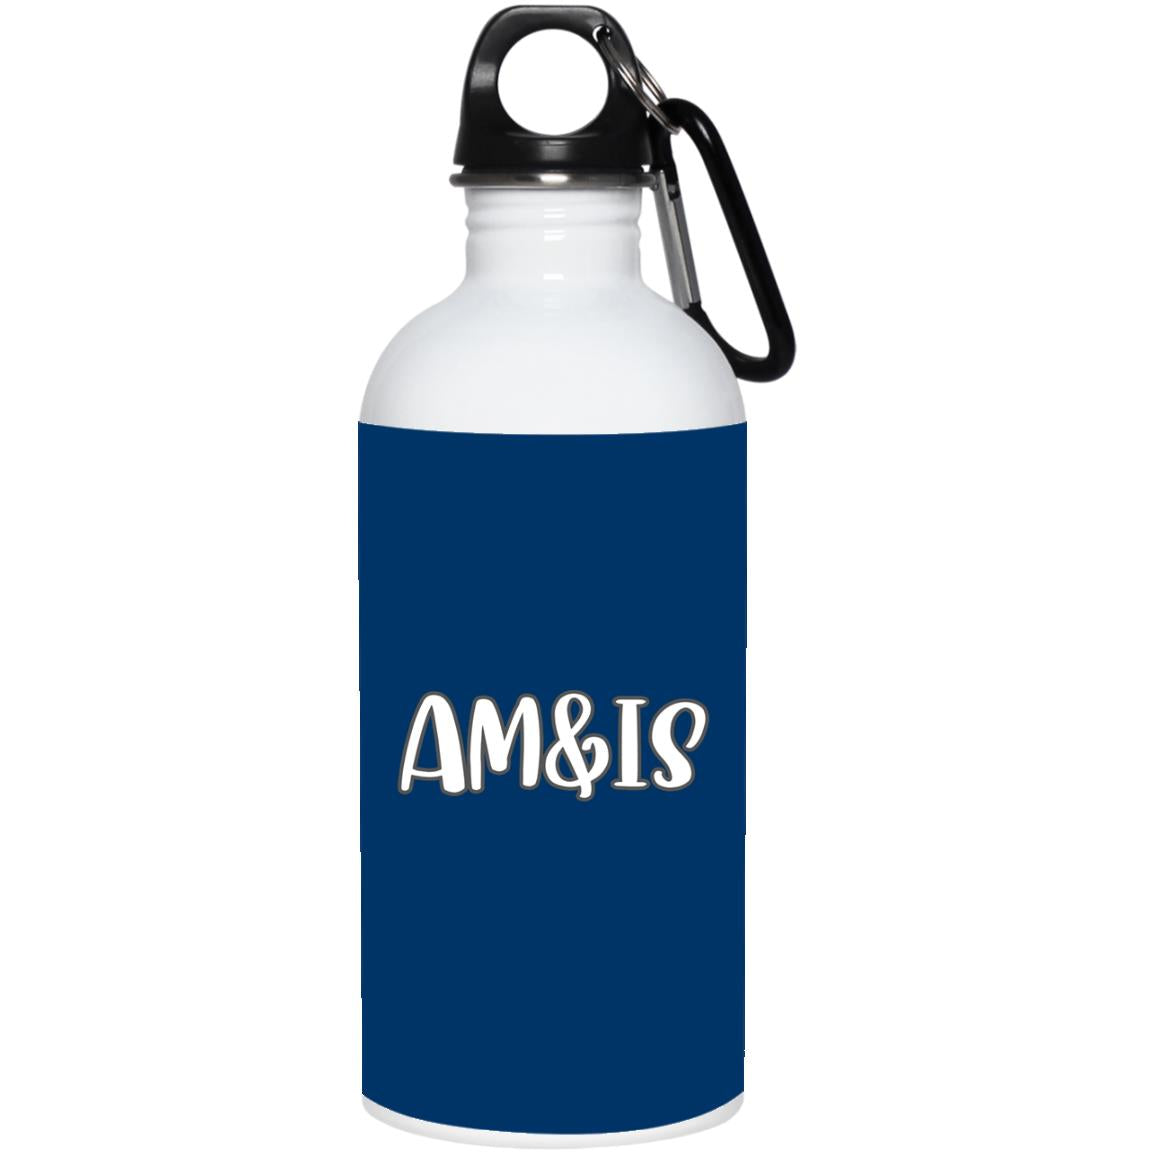 ROYAL ONE SIZE - AM&IS Activewear 20 oz. Stainless Steel Water Bottle - Drinkware at TFC&H Co.